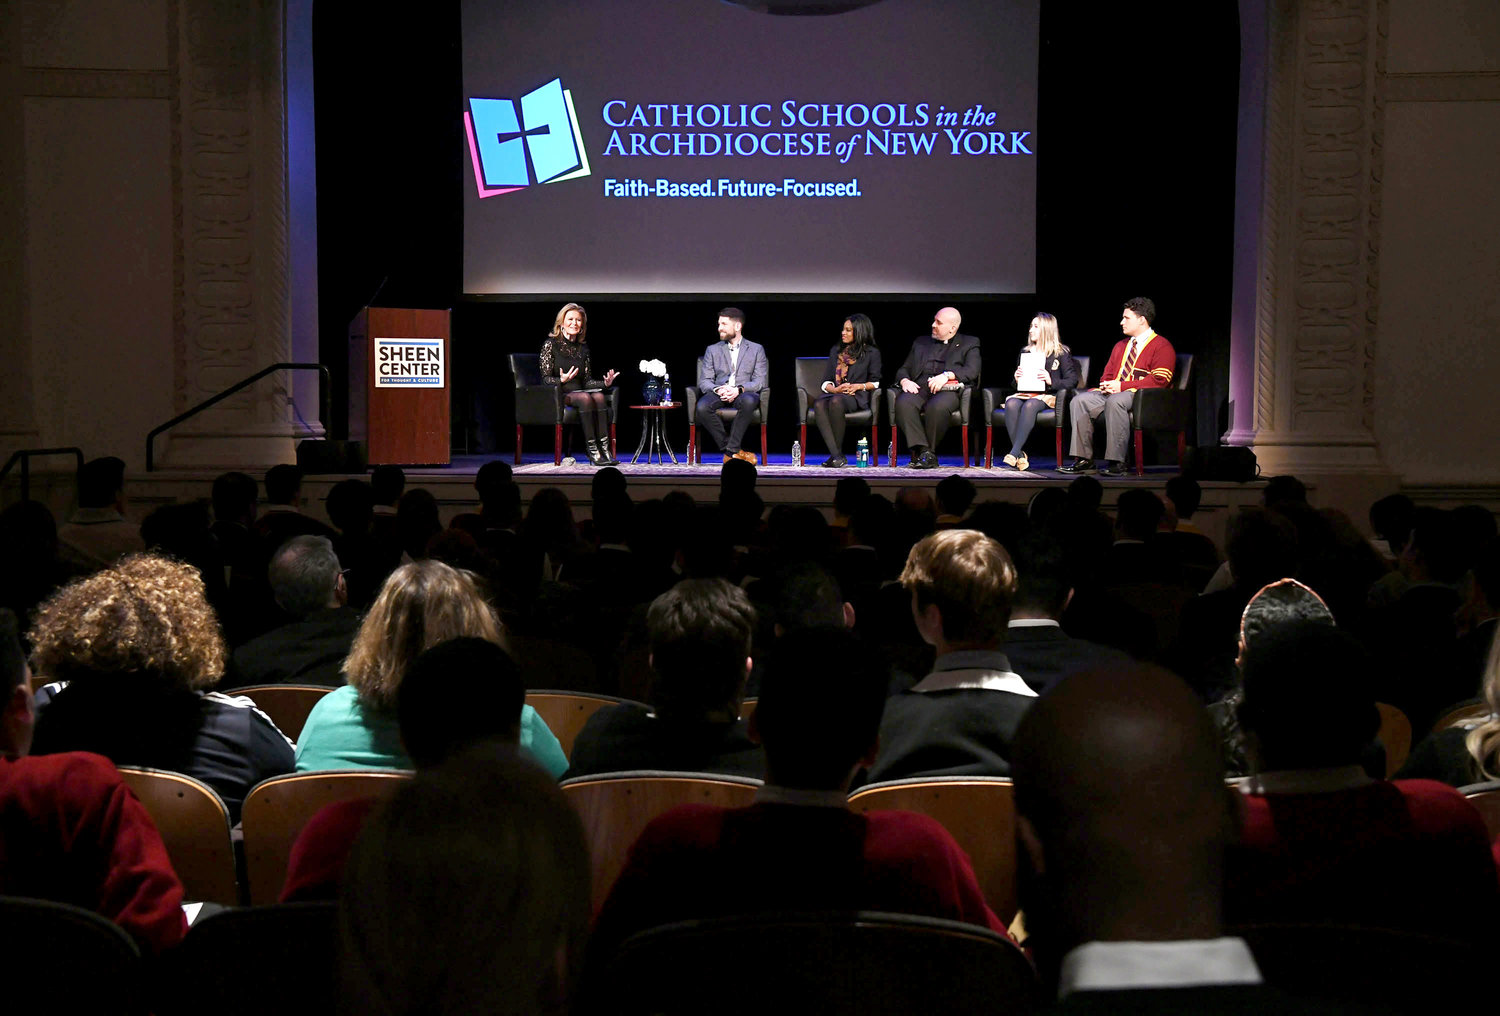 FUTURE-FOCUSED—On stage for the panel discussion were Monica Morales, moderator; Pete Burak, keynote speaker, and panelists Danielle M. Brown, Father Joseph Espaillat, and students Virginia Capellupo and Frank Scafuri.